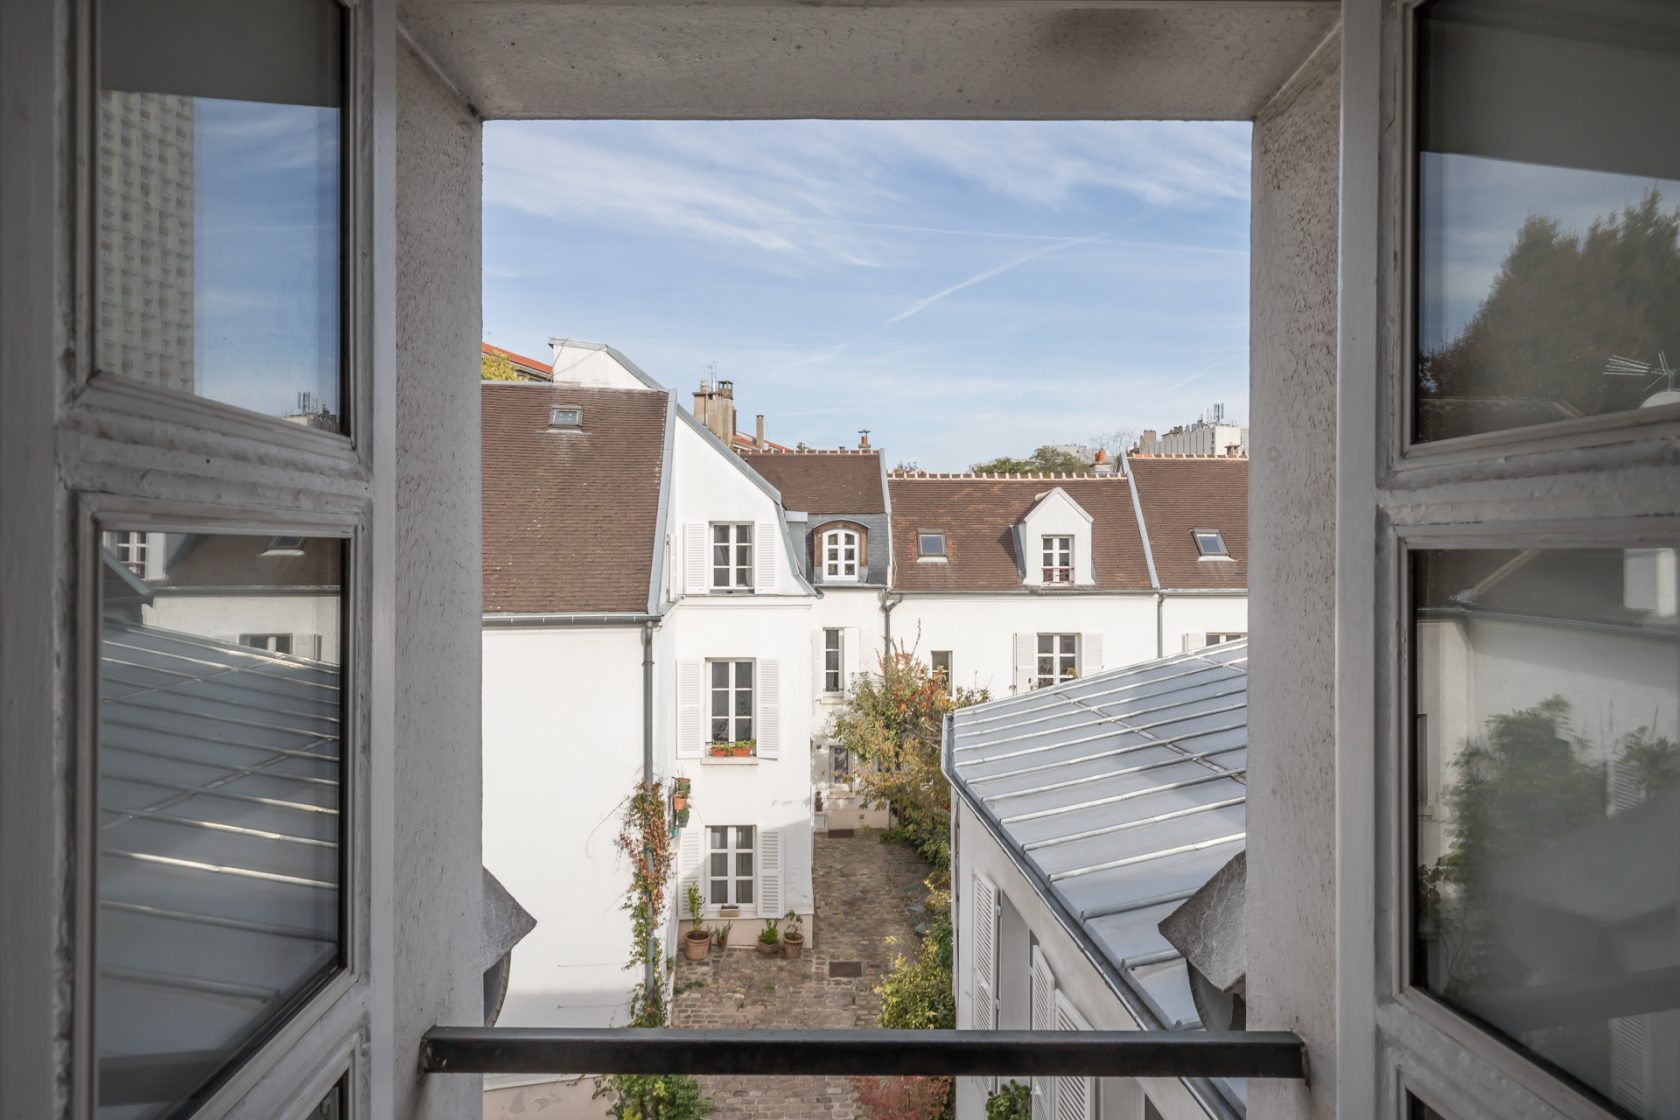 Townhouse in the heart of the Charonne Village